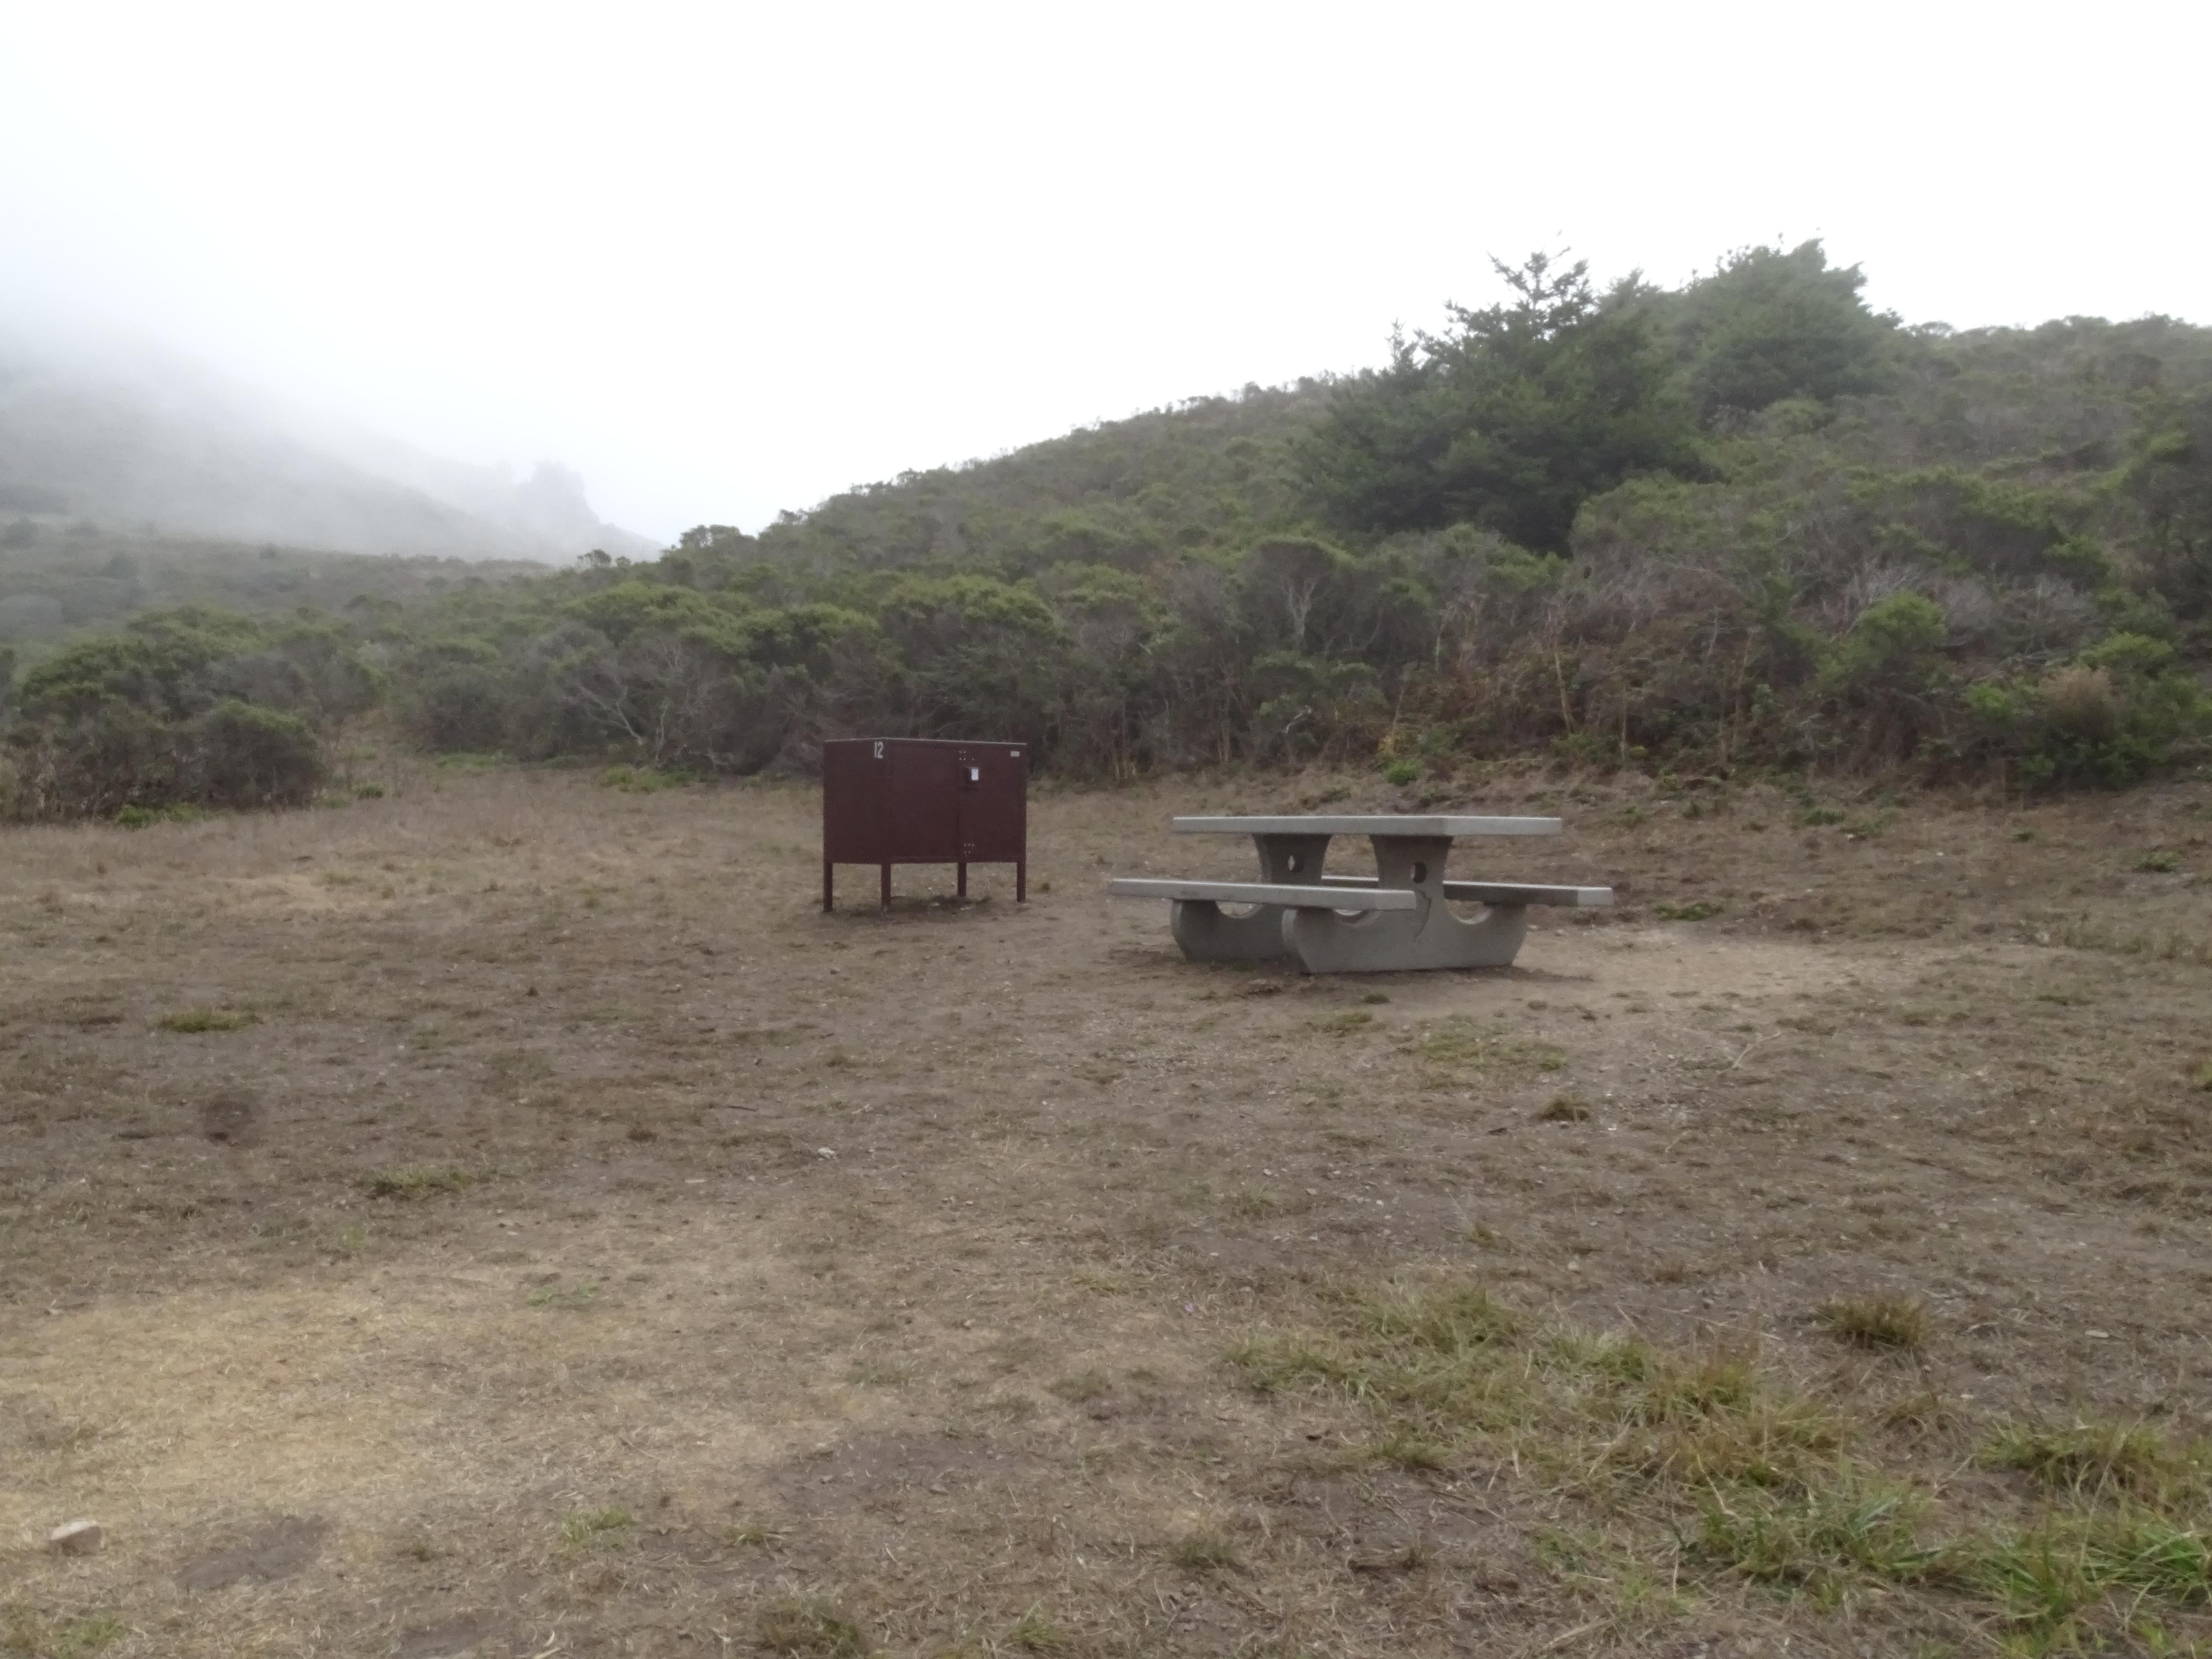 A campsite containing a picnic table and a food storage locker in front of a shrub-covered hill.